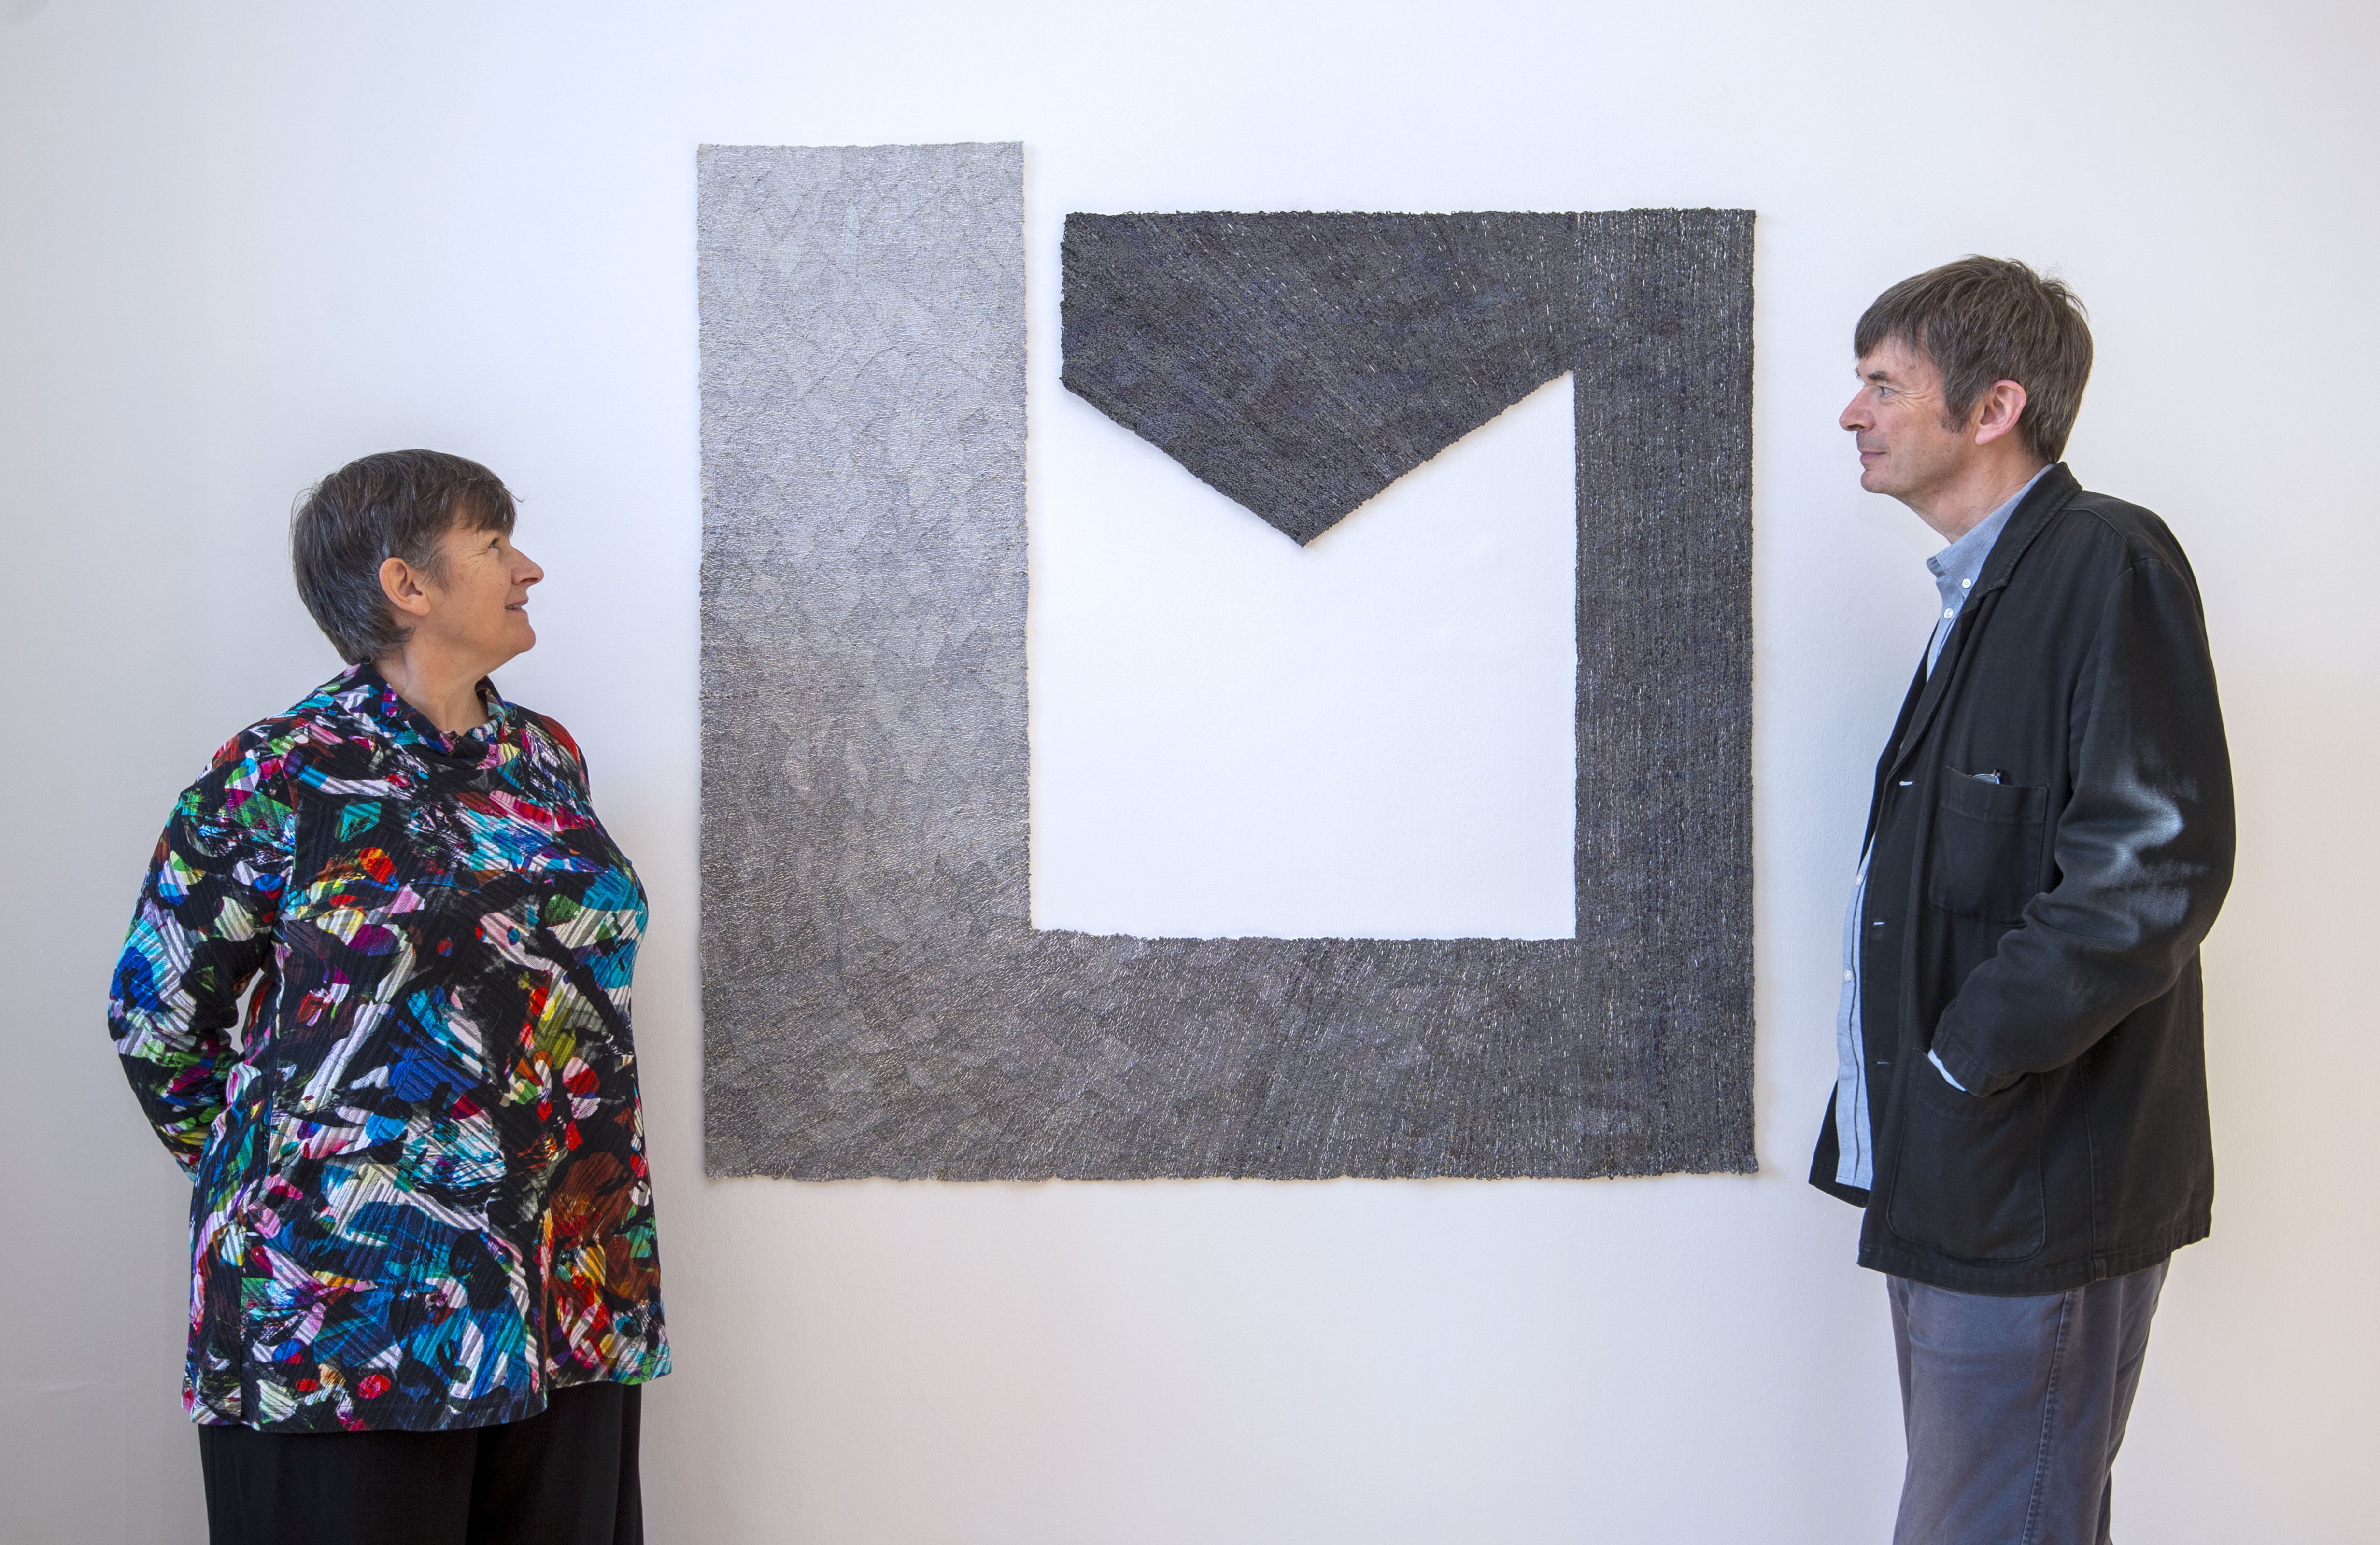 Miranda Harvey and Ian Rankin of the Cordis Prize with the 2021 winning tapestry by artist Louise Martin